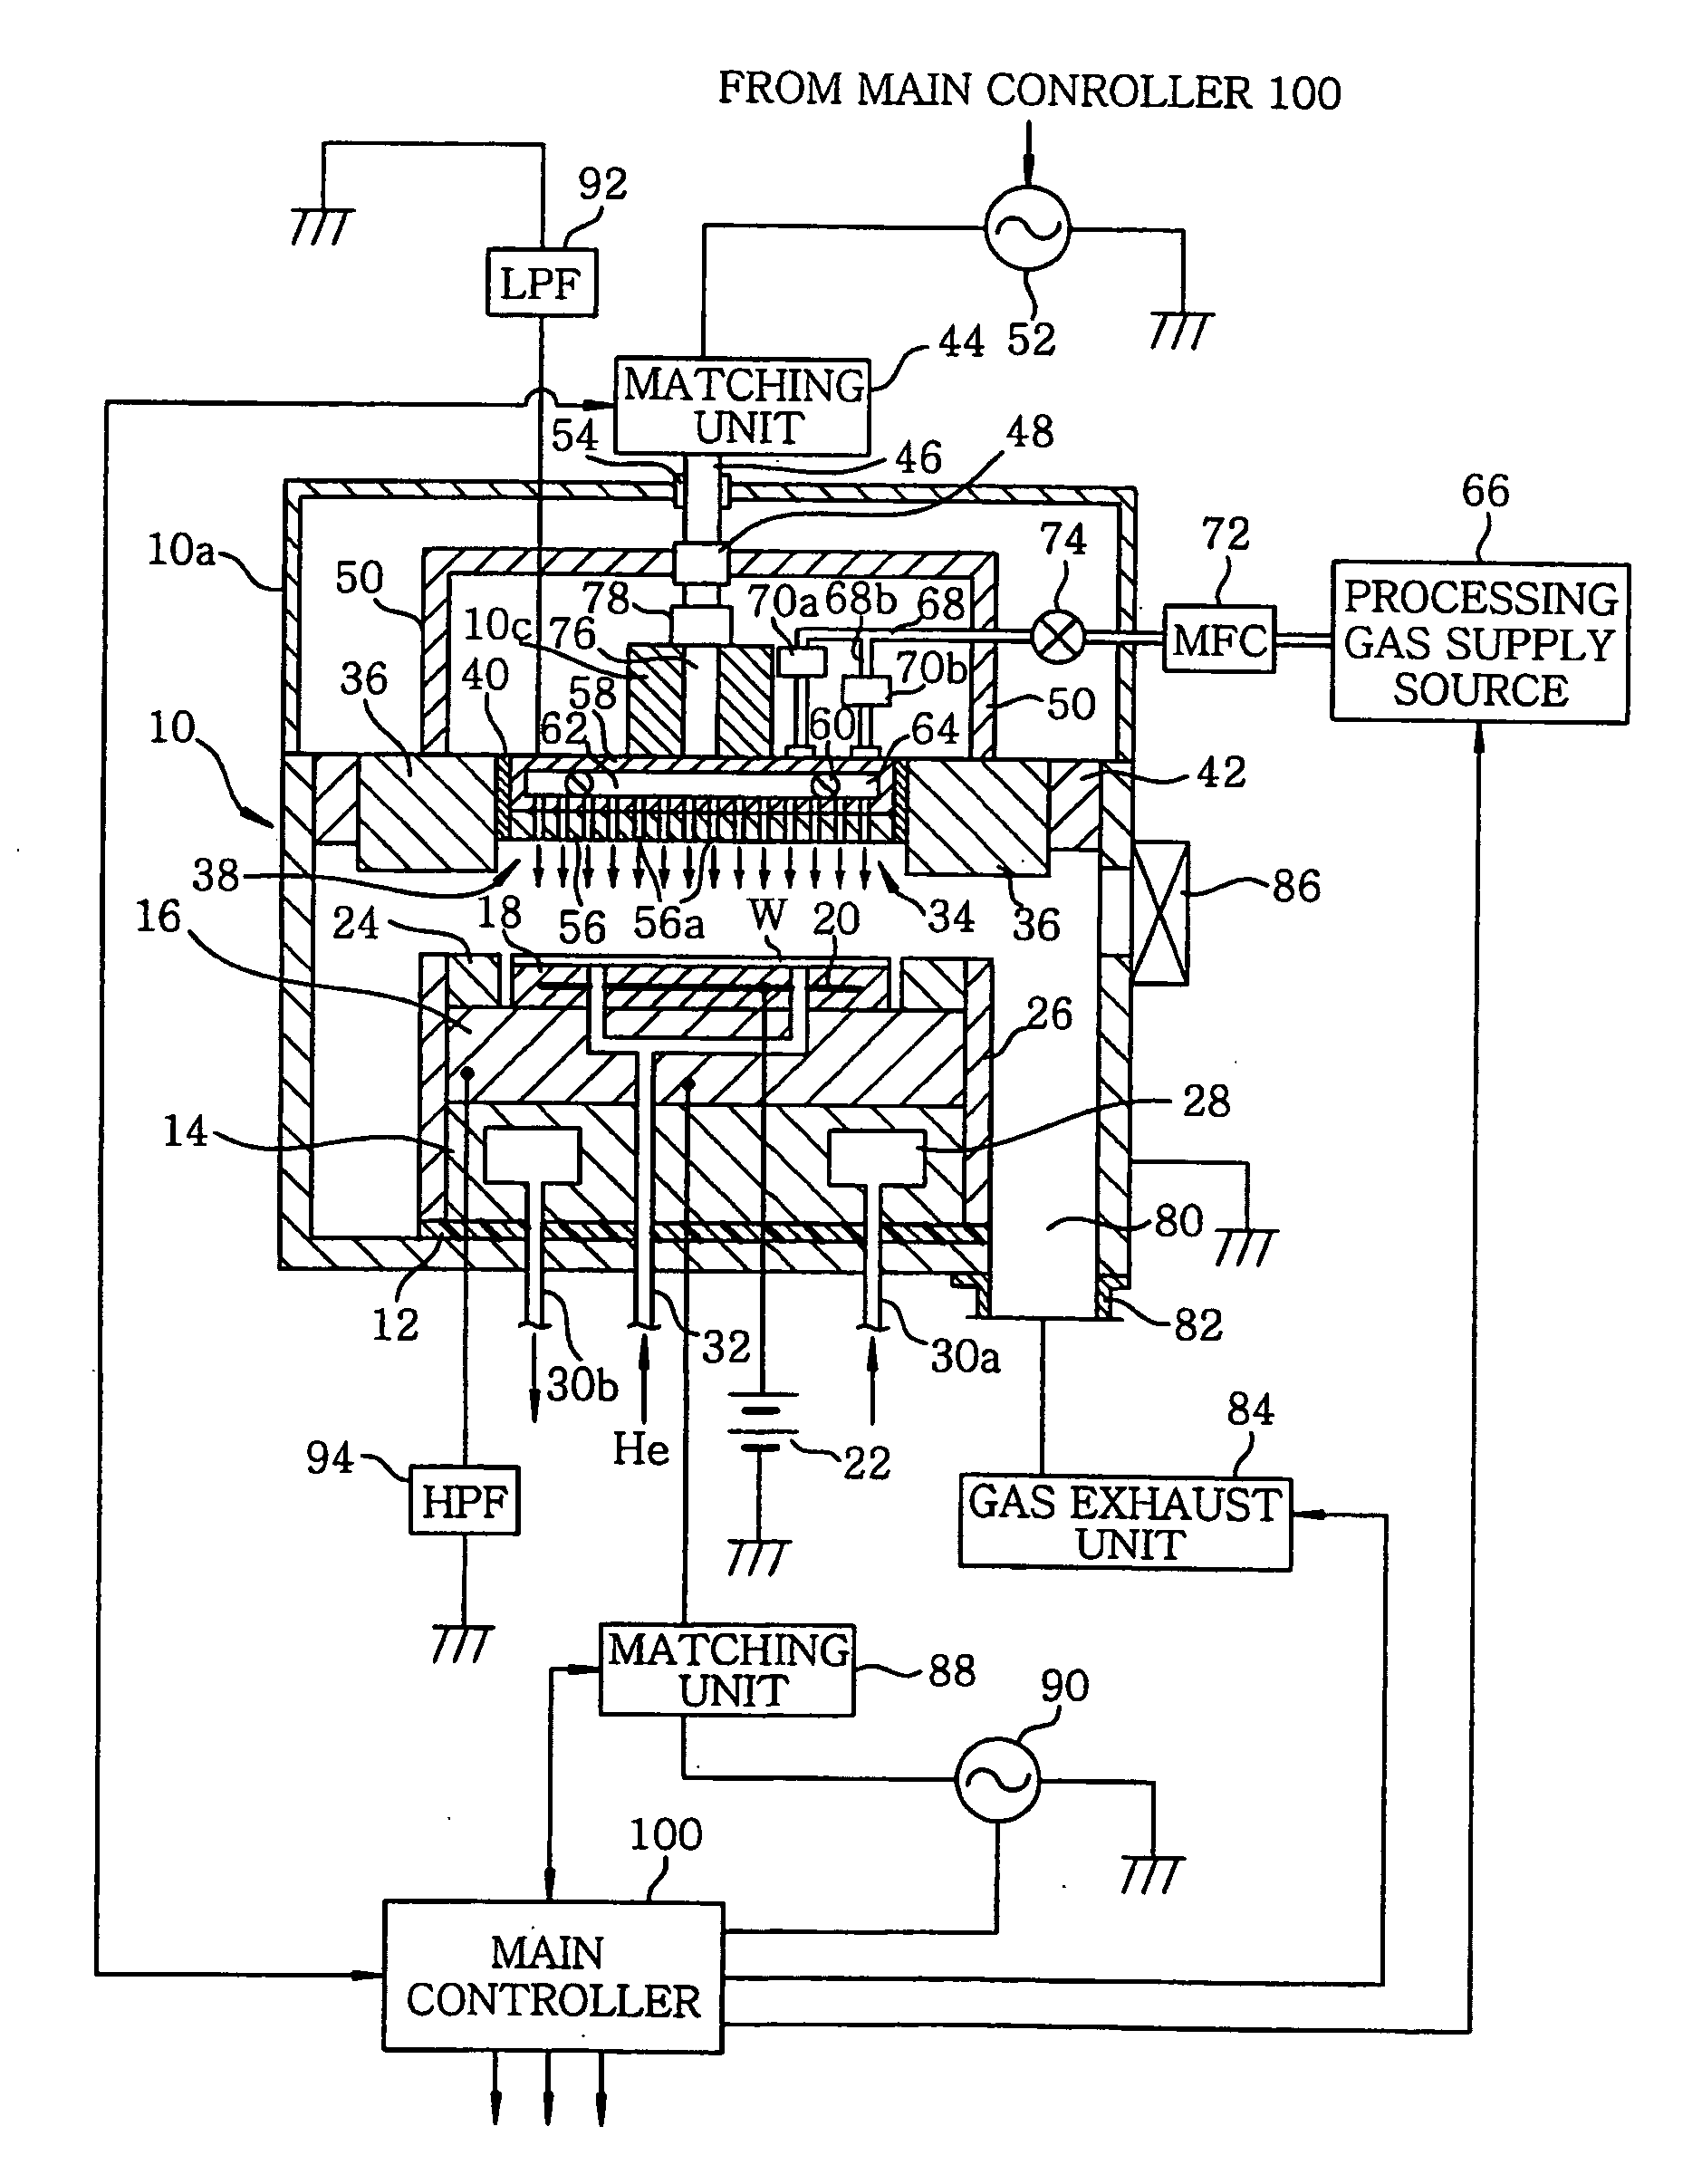 Plasma processing method and apparatus, and autorunning program for variable matching unit